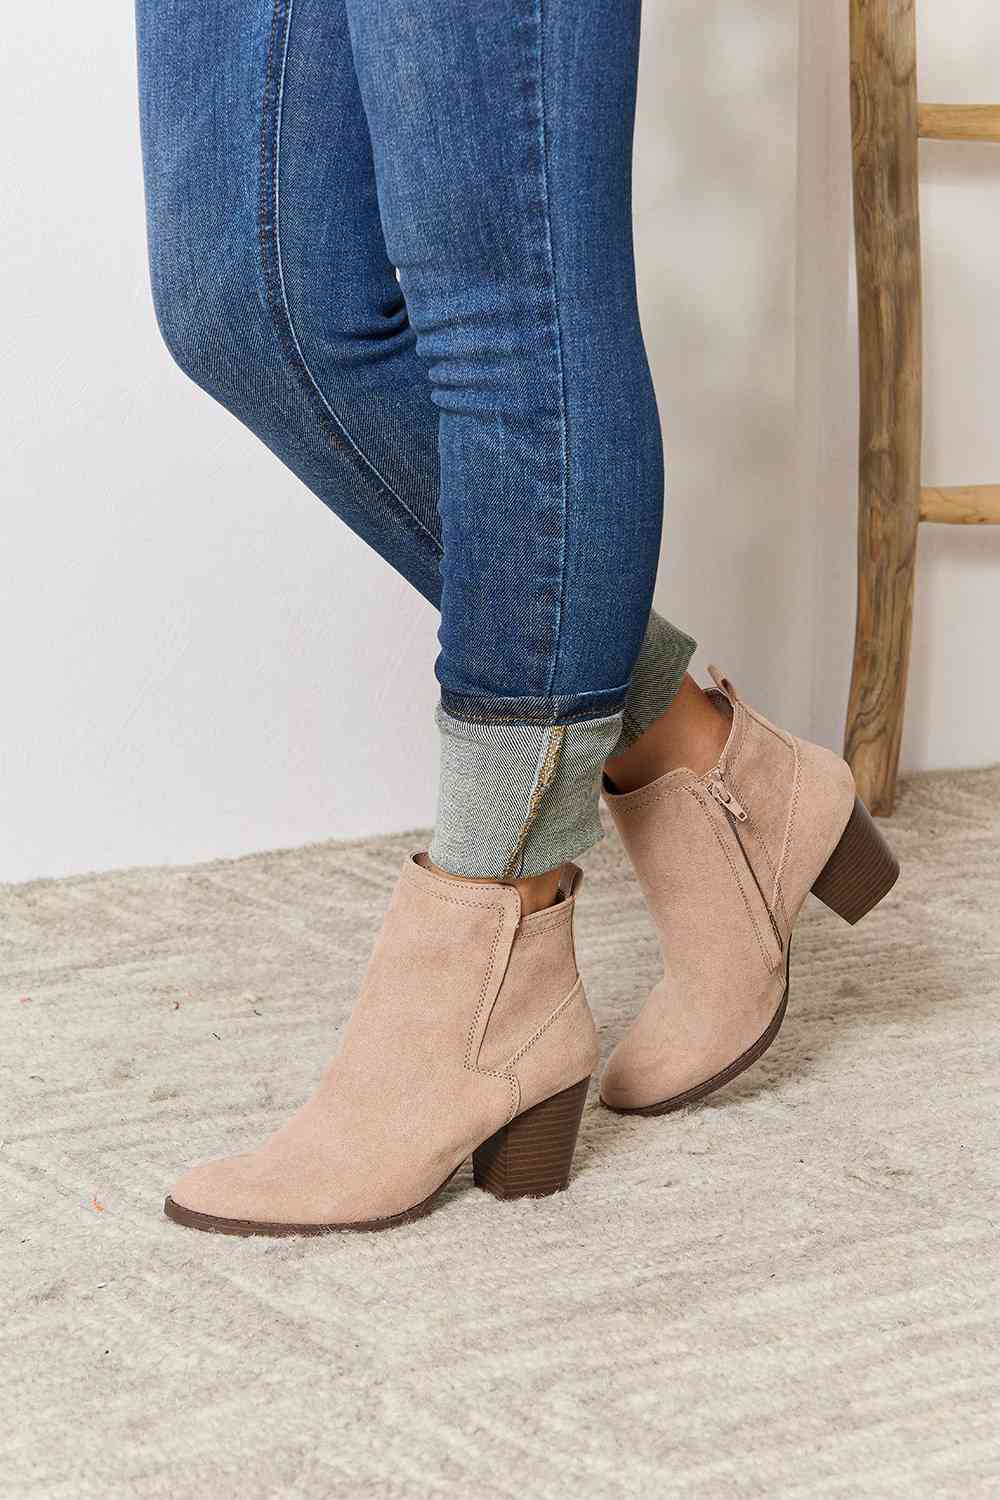 Suede Ankle Booties (6-10)